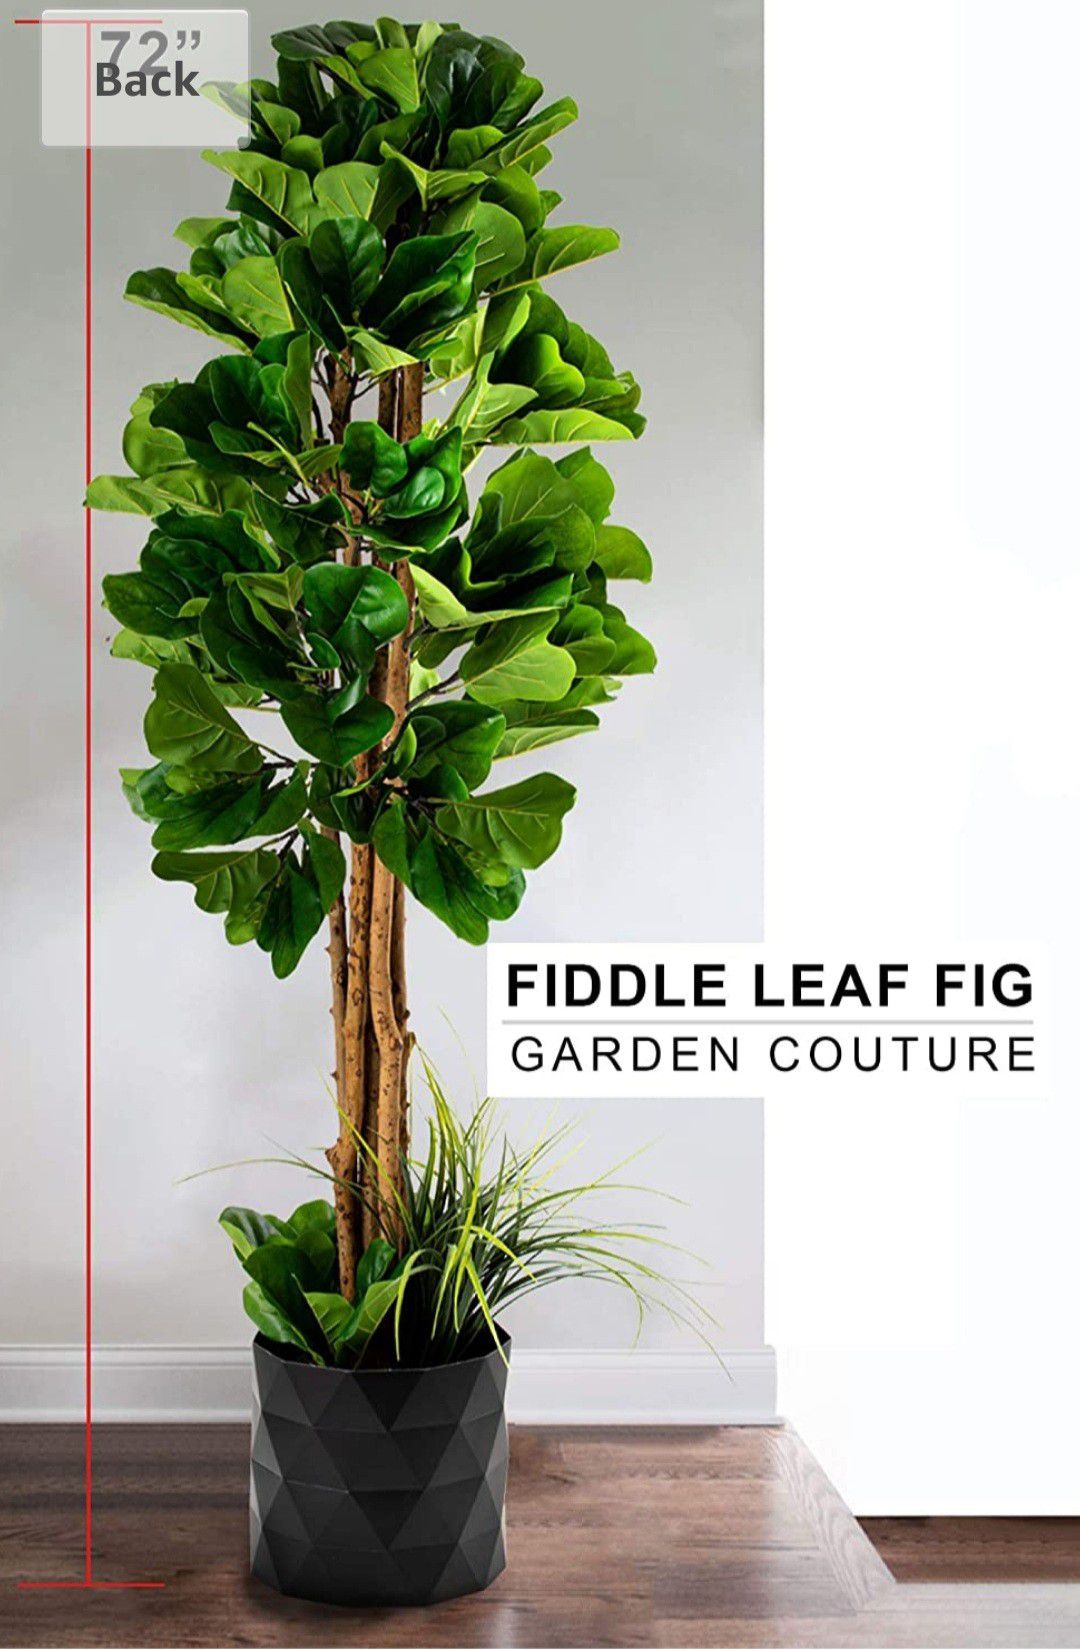 GARDEN COUTURE Deluxe 72" Premium Fiddle Leaf FIG Artificial Tree + Fiddle Leaf and Tropical Grass Foliage in 10" Base + 12" Plant Pot Skirt (New)